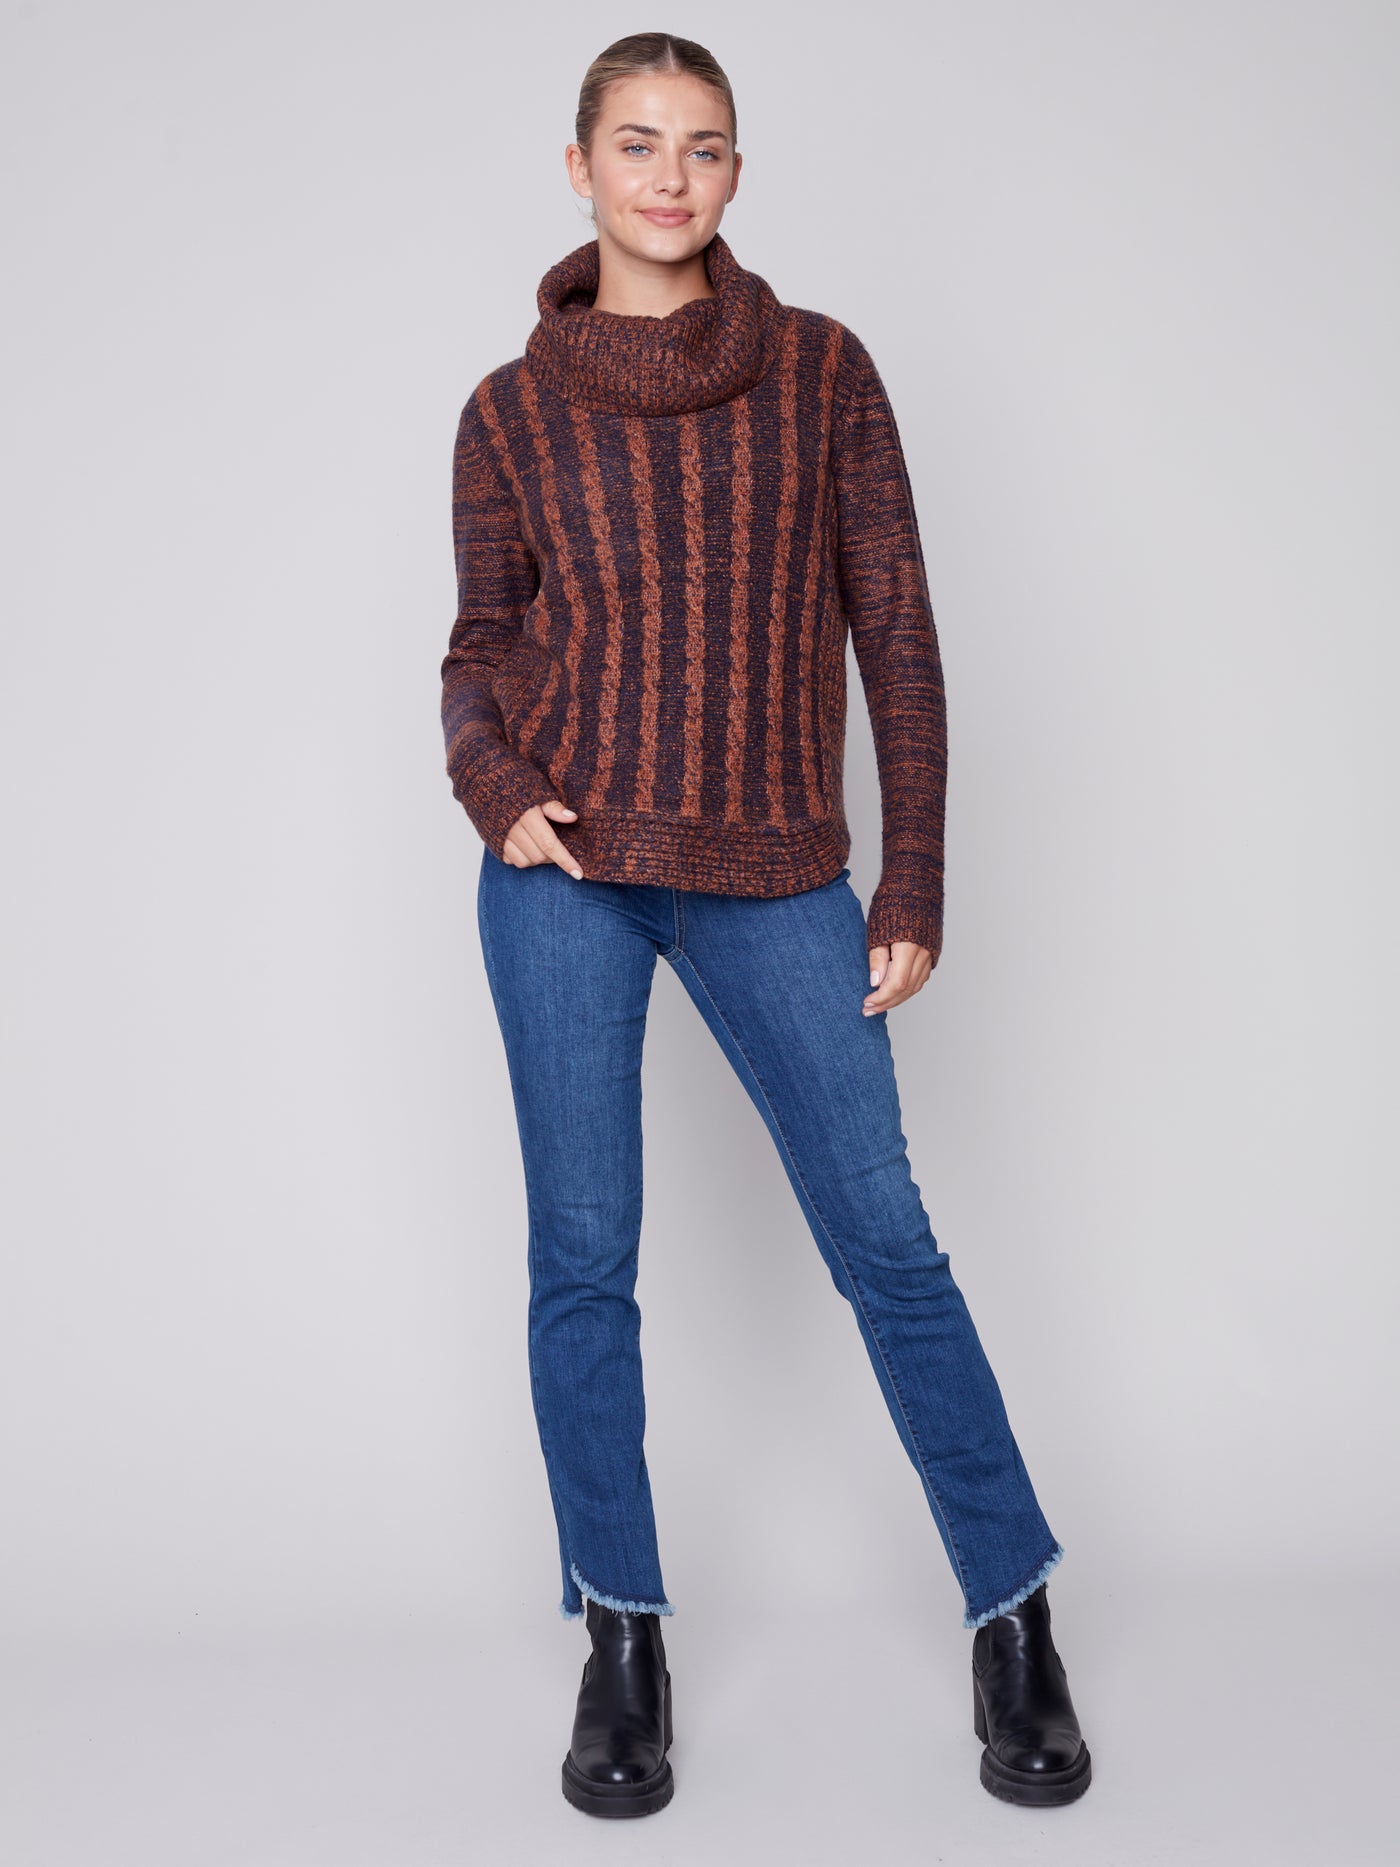 Charlie B Top - Cable Knit - Cinnamon